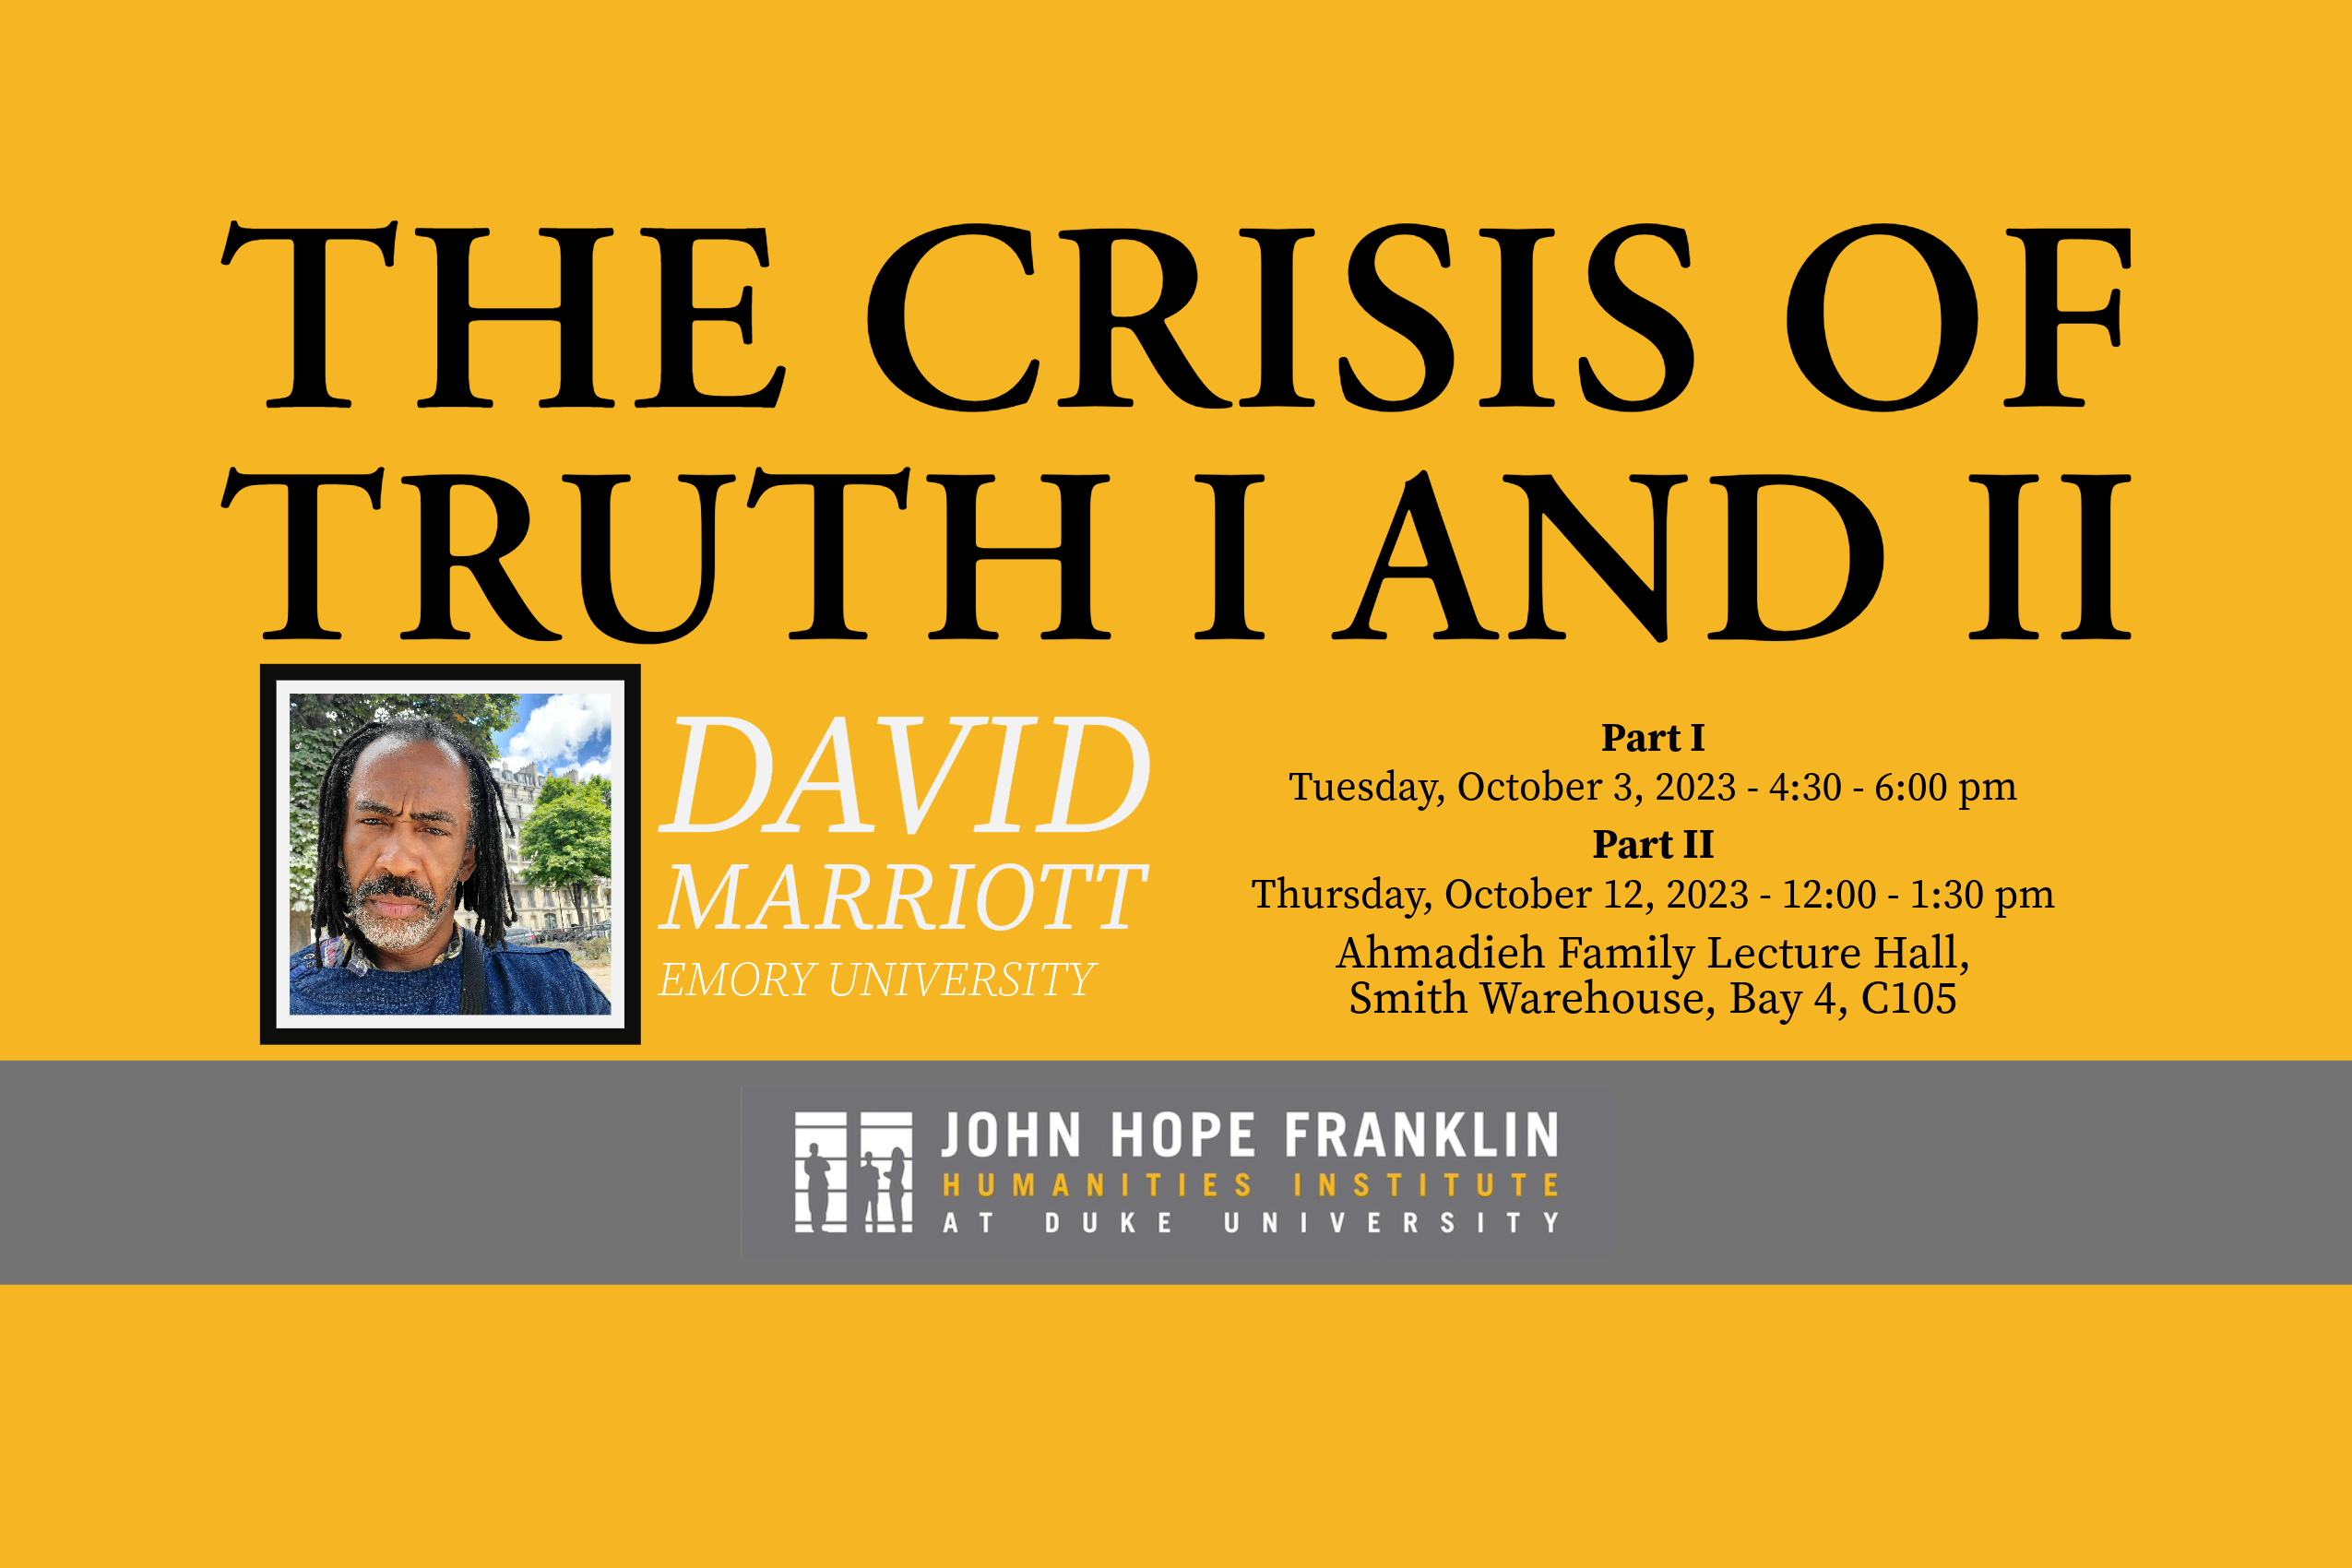 Photo of David Marriott. Black text on yellow background with FHI logo.